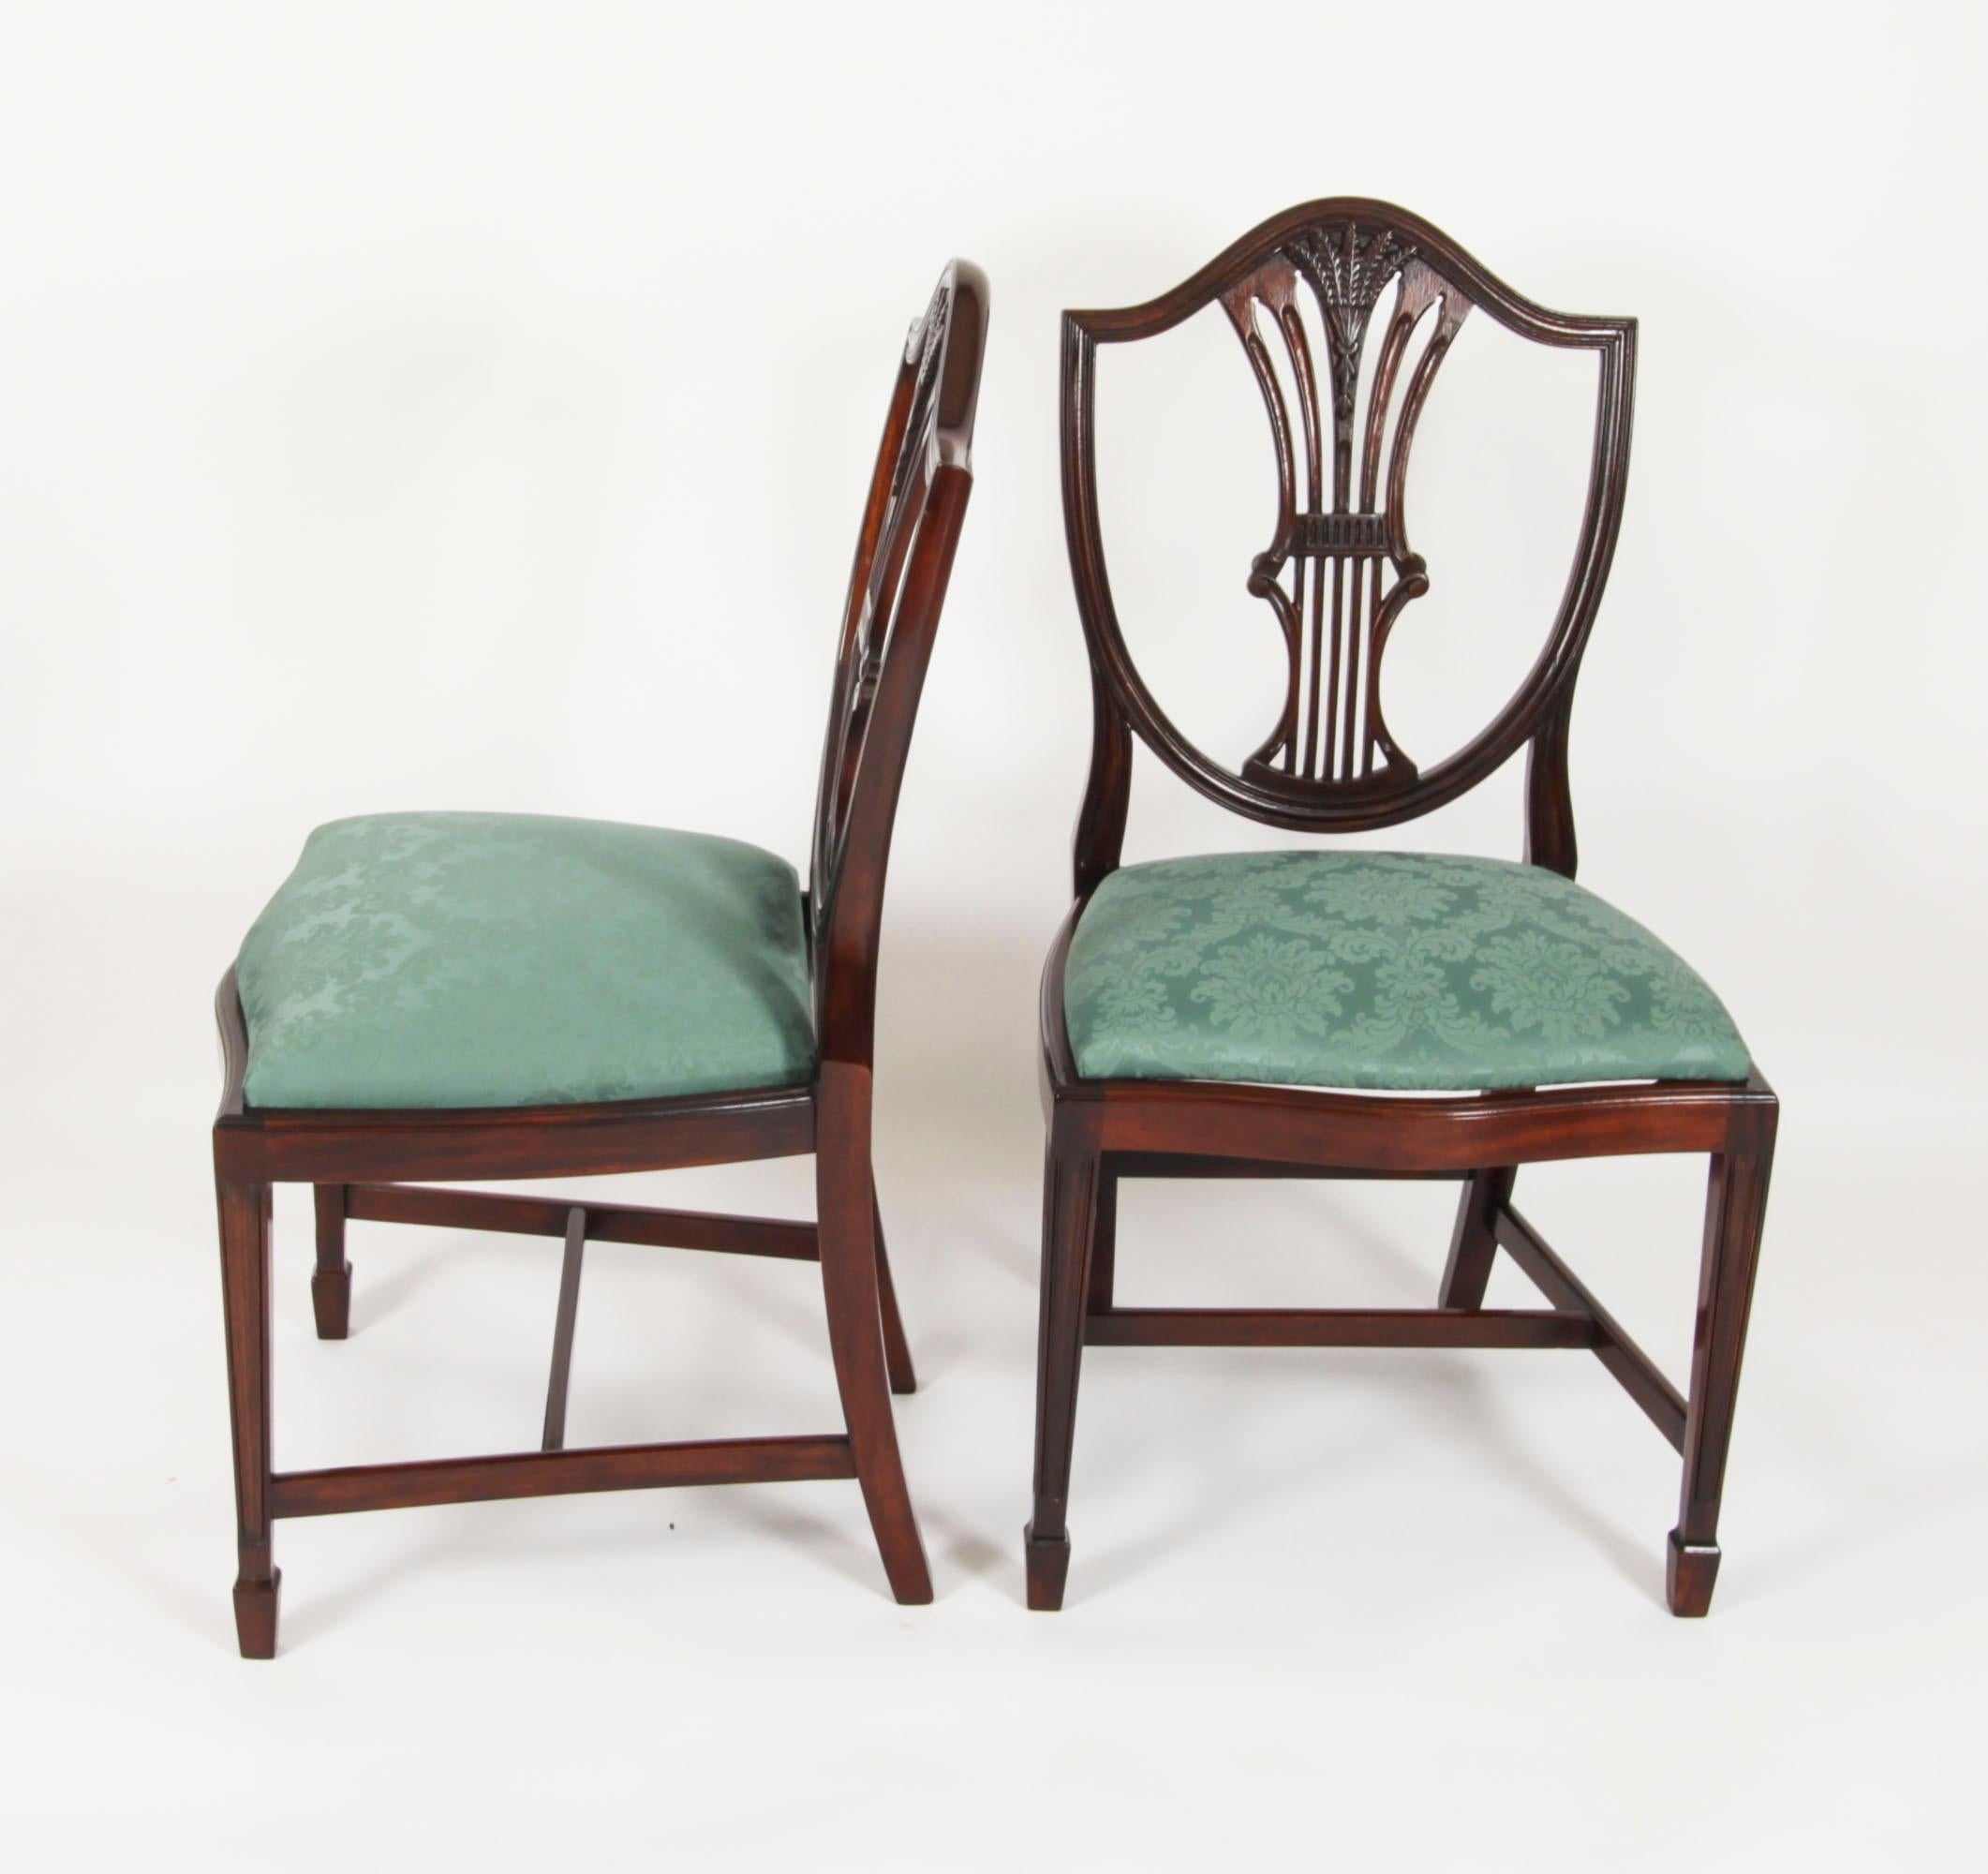 The fantastic vintage set of fourteen wheatsheaf shieldback mahogany dining chairs, date from the mid 20th Century.

Masterfully crafted in beautiful solid mahogany throughout, the finish and attention to detail on display are truly